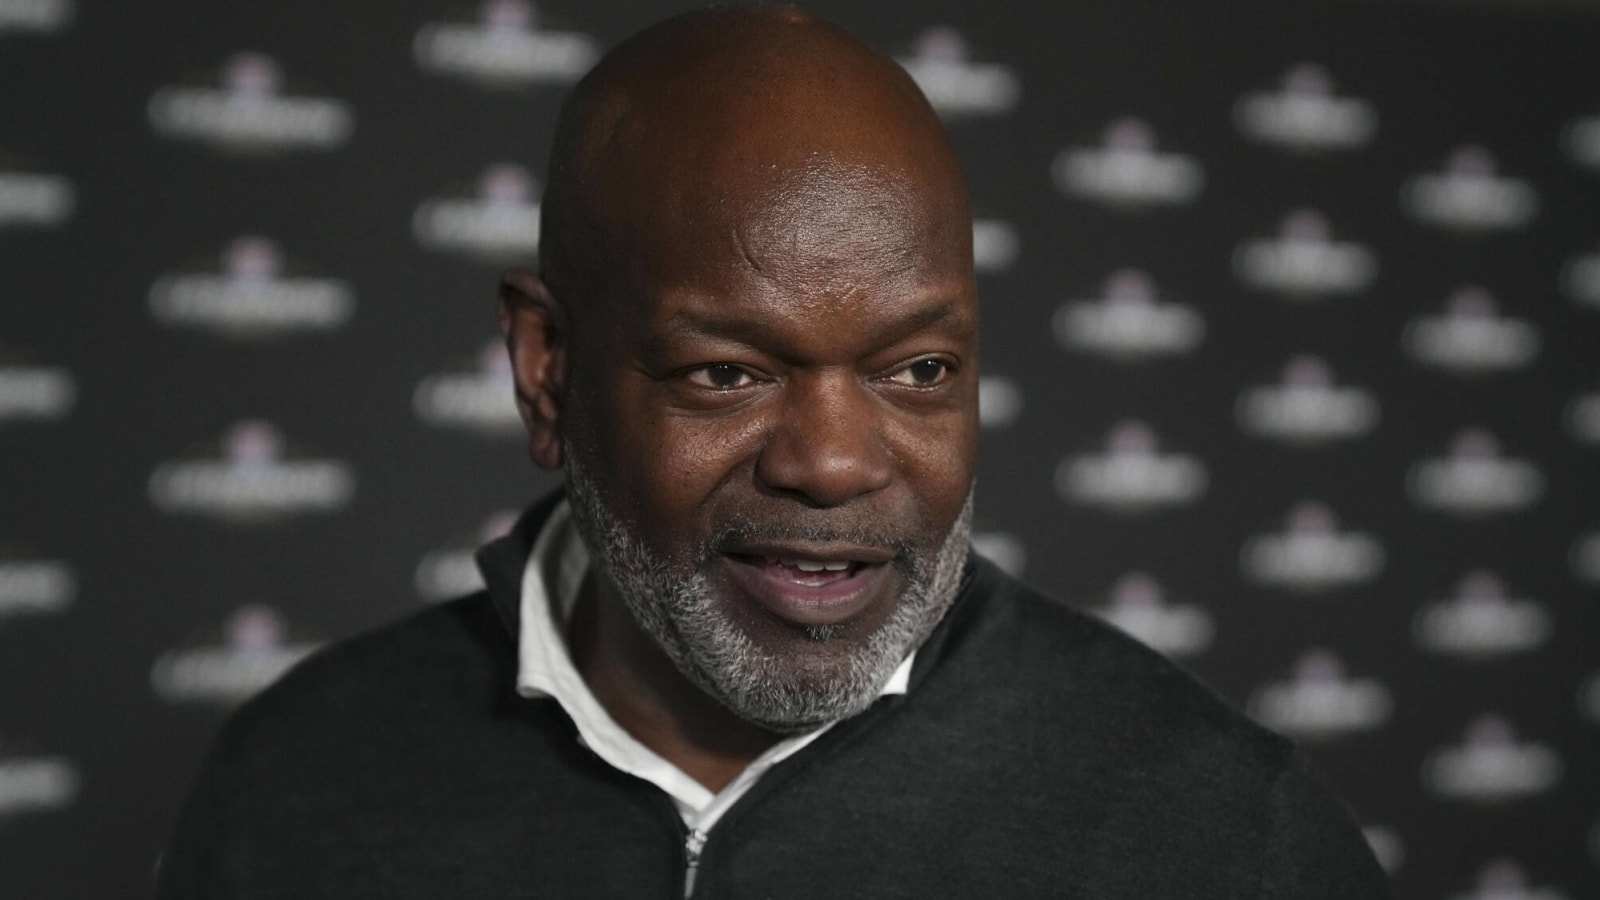 Why Emmitt Smith is worried about himself, Dolphins' Tua Tagovailoa